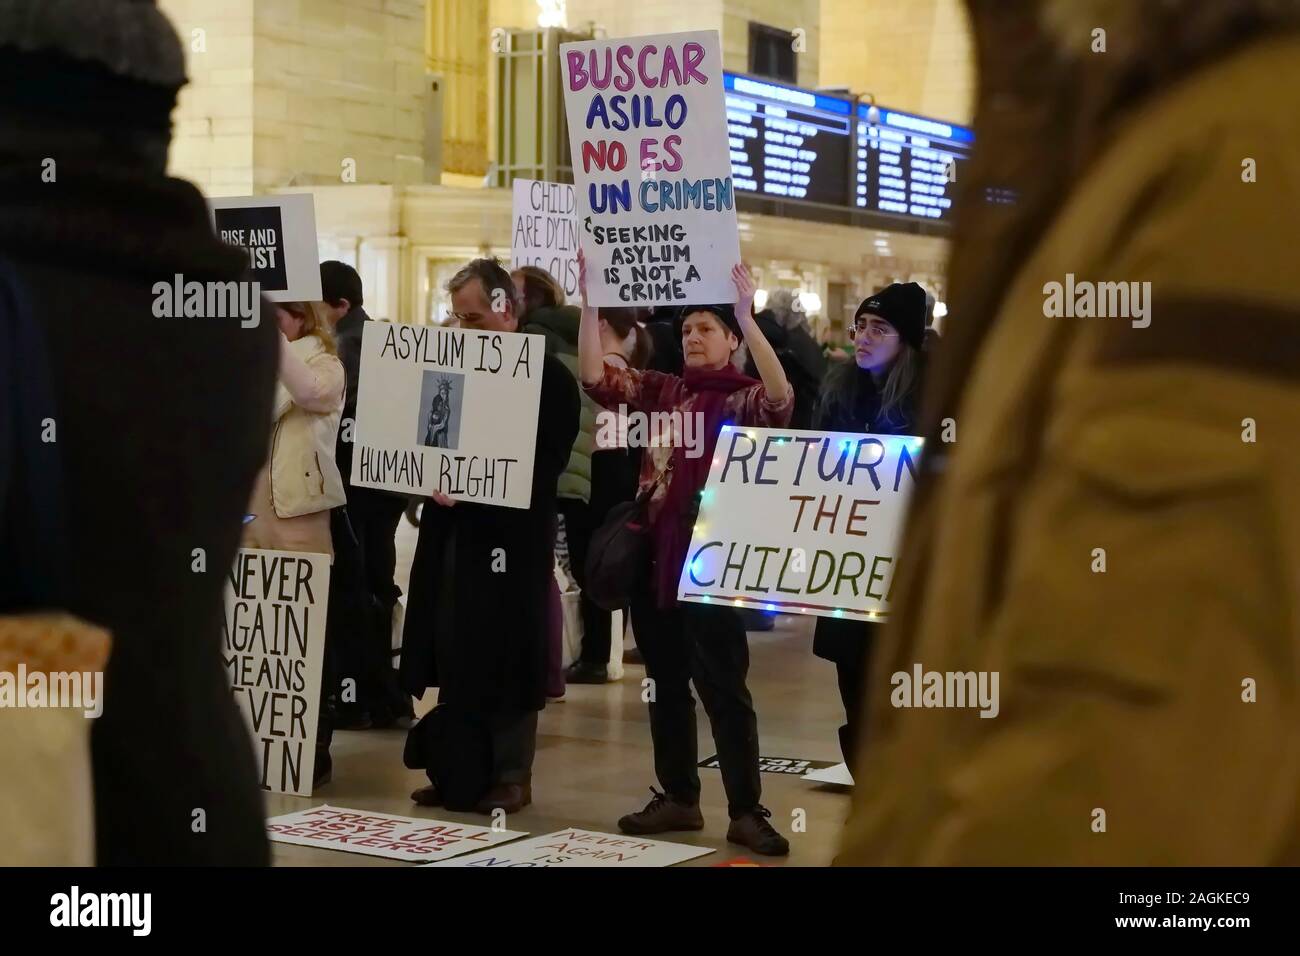 New York, NY / USA - December 19, 2019: Activists from the group Rise and Resist NYC holds up a banner and looks on stoically during a silent protest Stock Photo